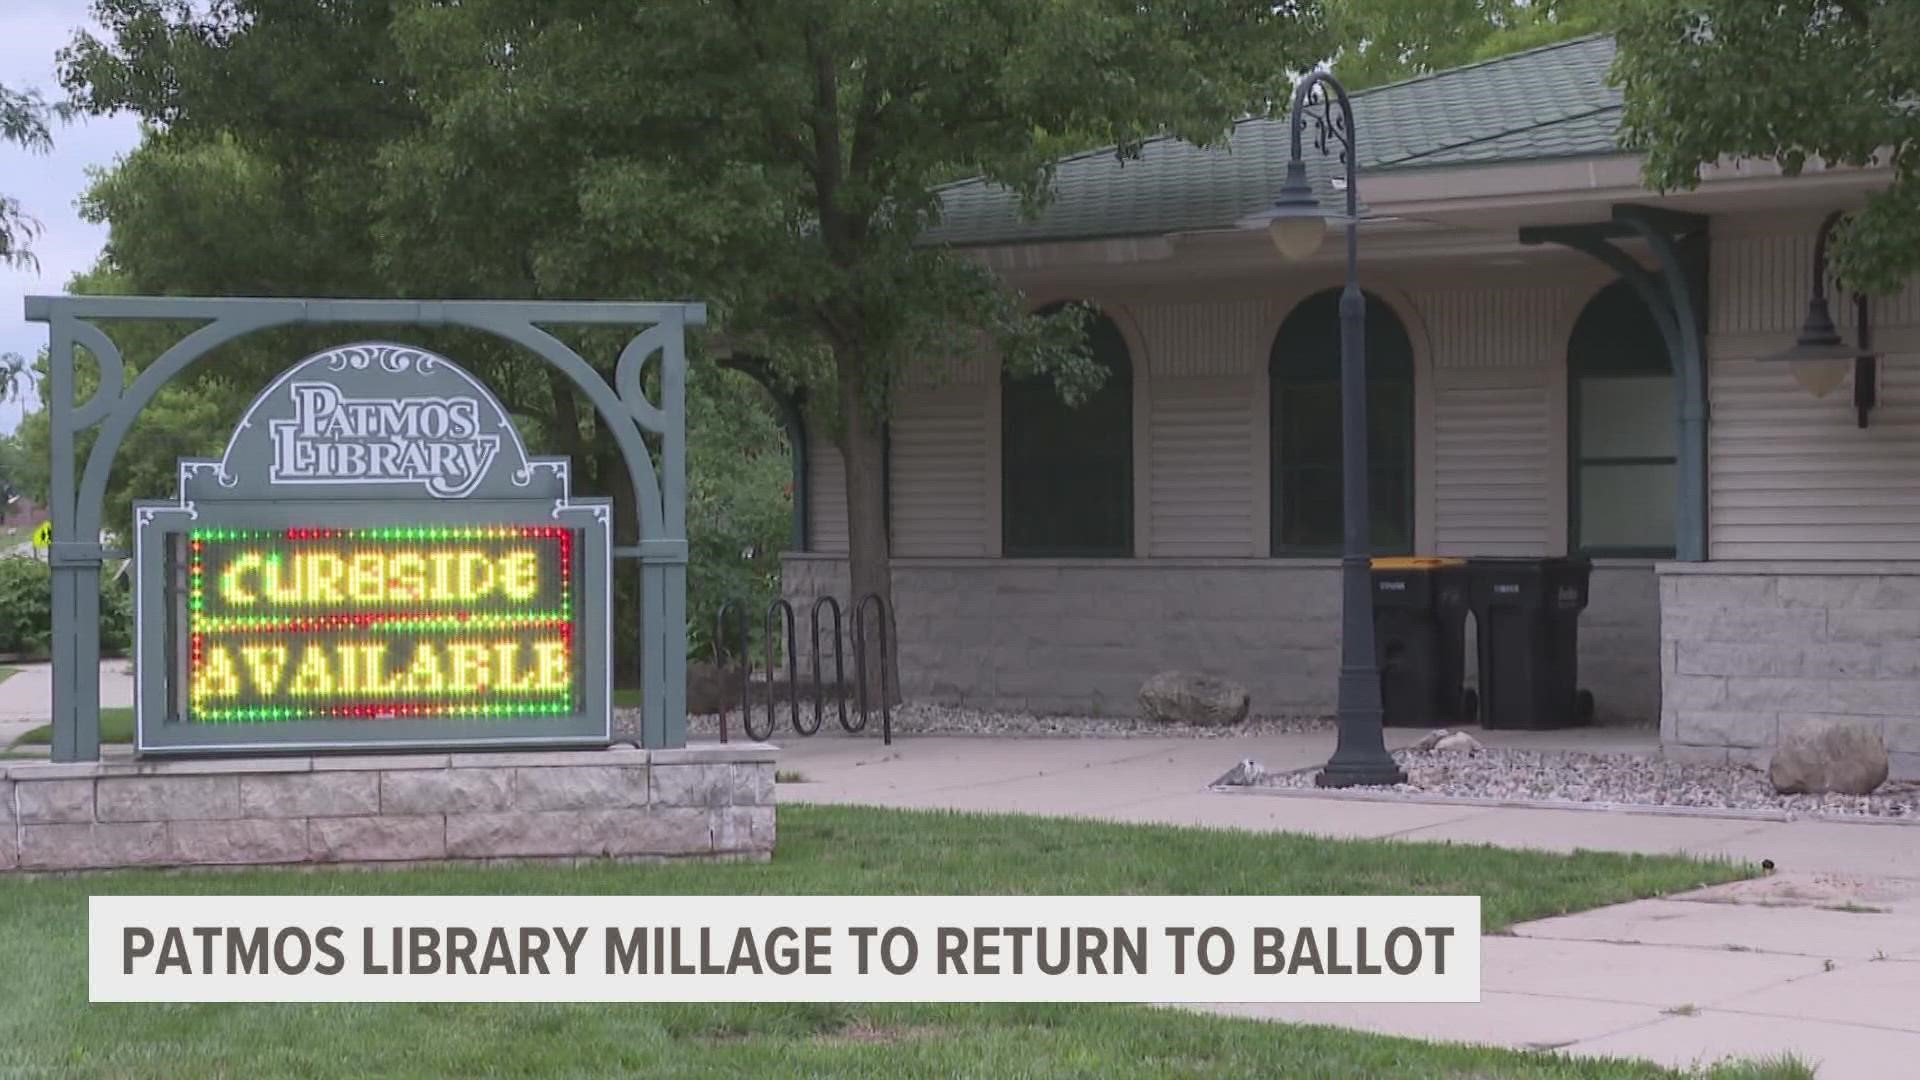 The library board's meeting was well-attended Monday night after a millage to fund the library failed last week.